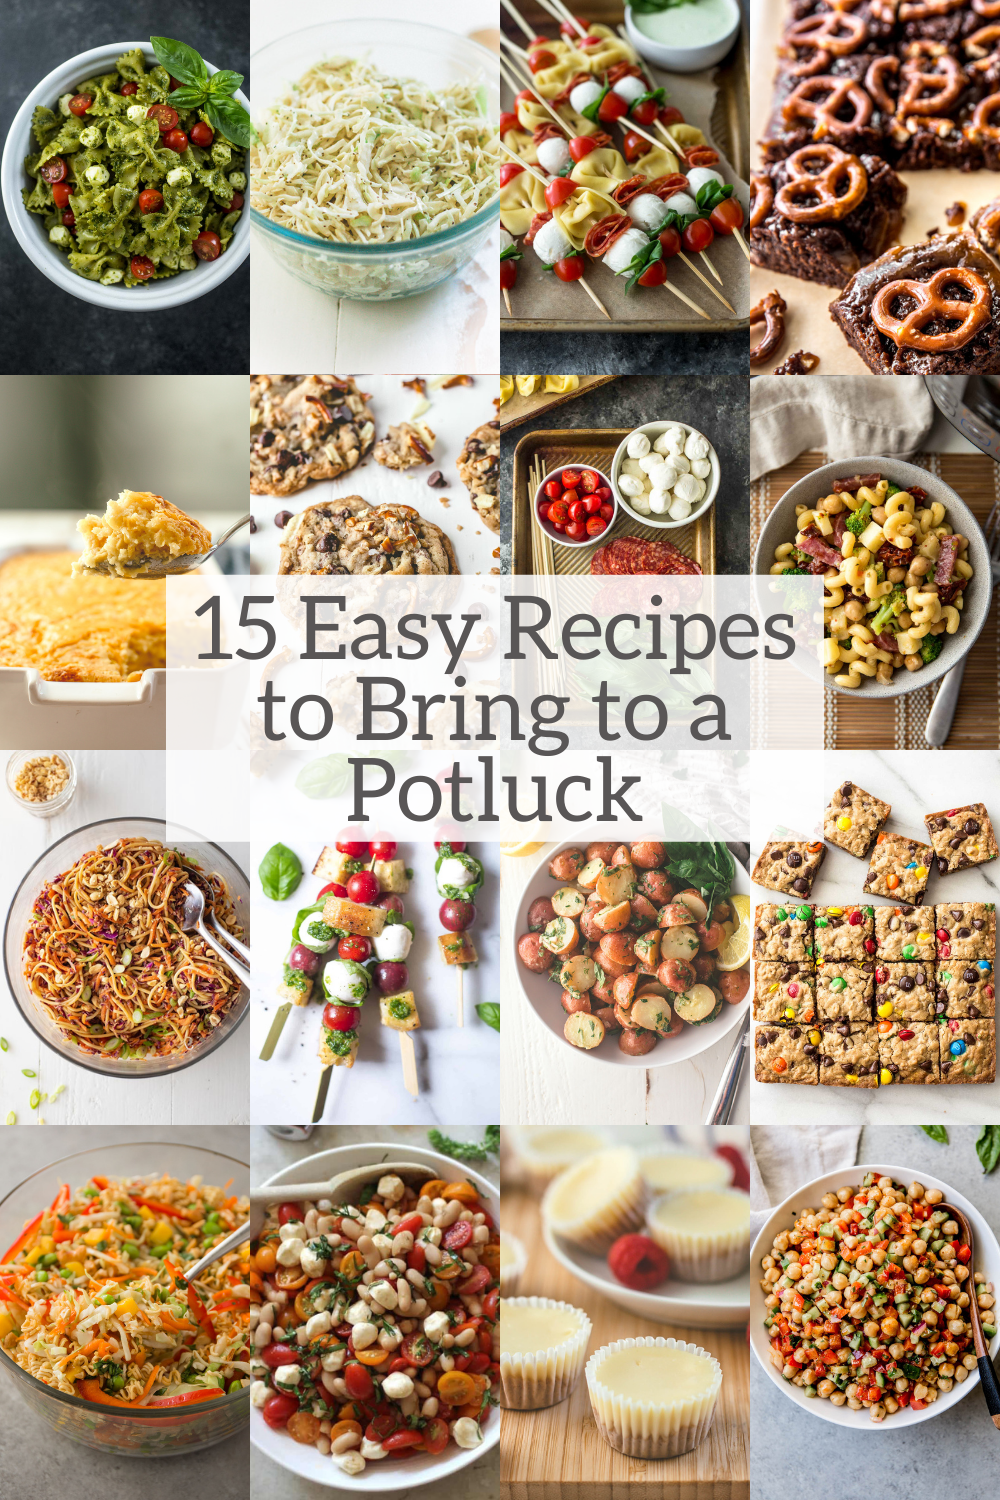 15 Easy Recipes to Bring to a Potluck